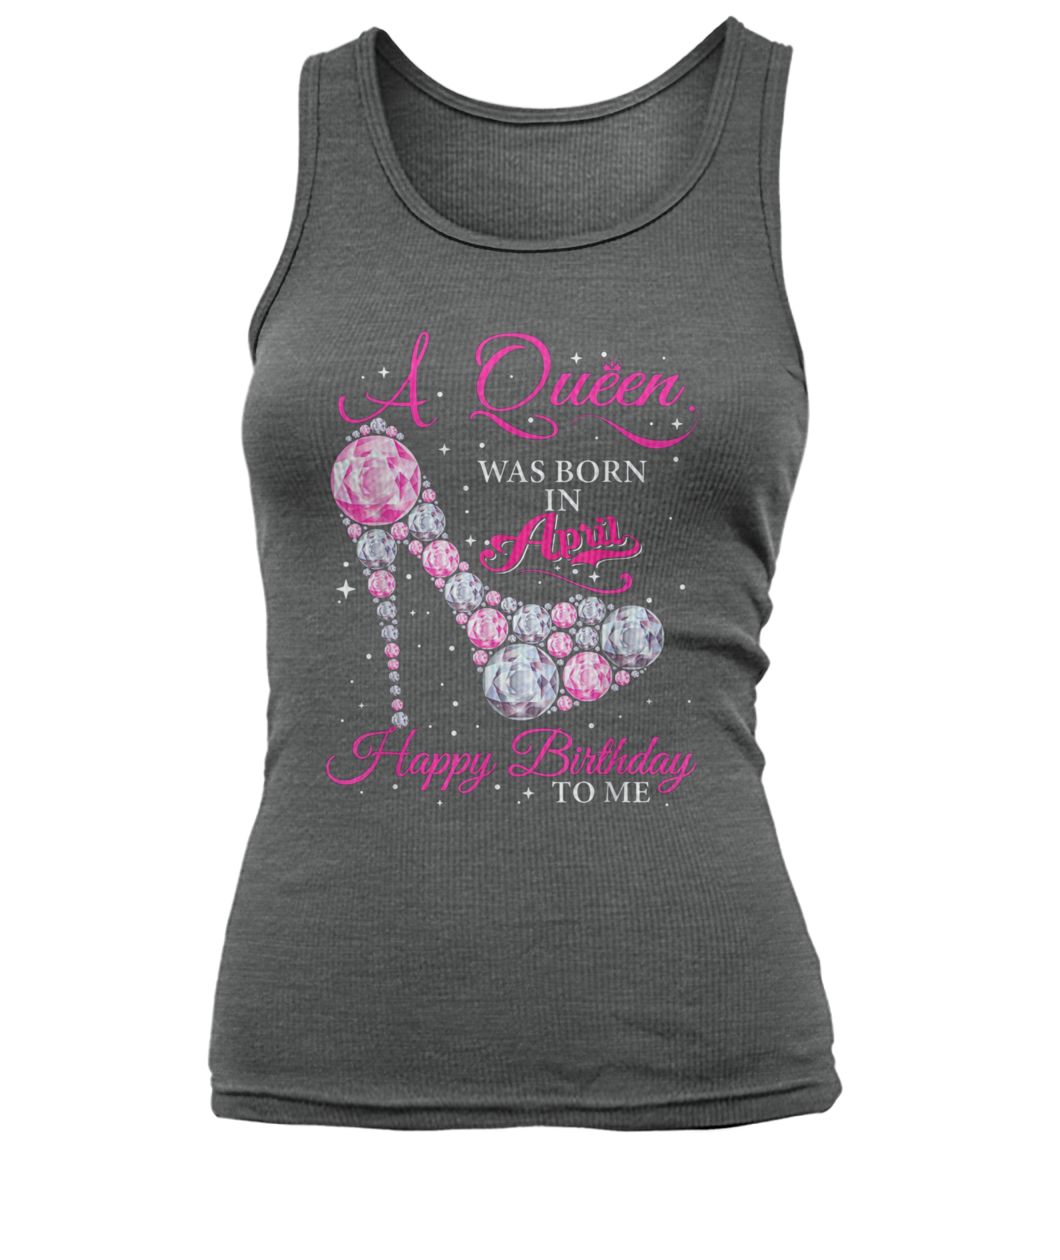 A queen was born in april happy birthday to me women's tank top